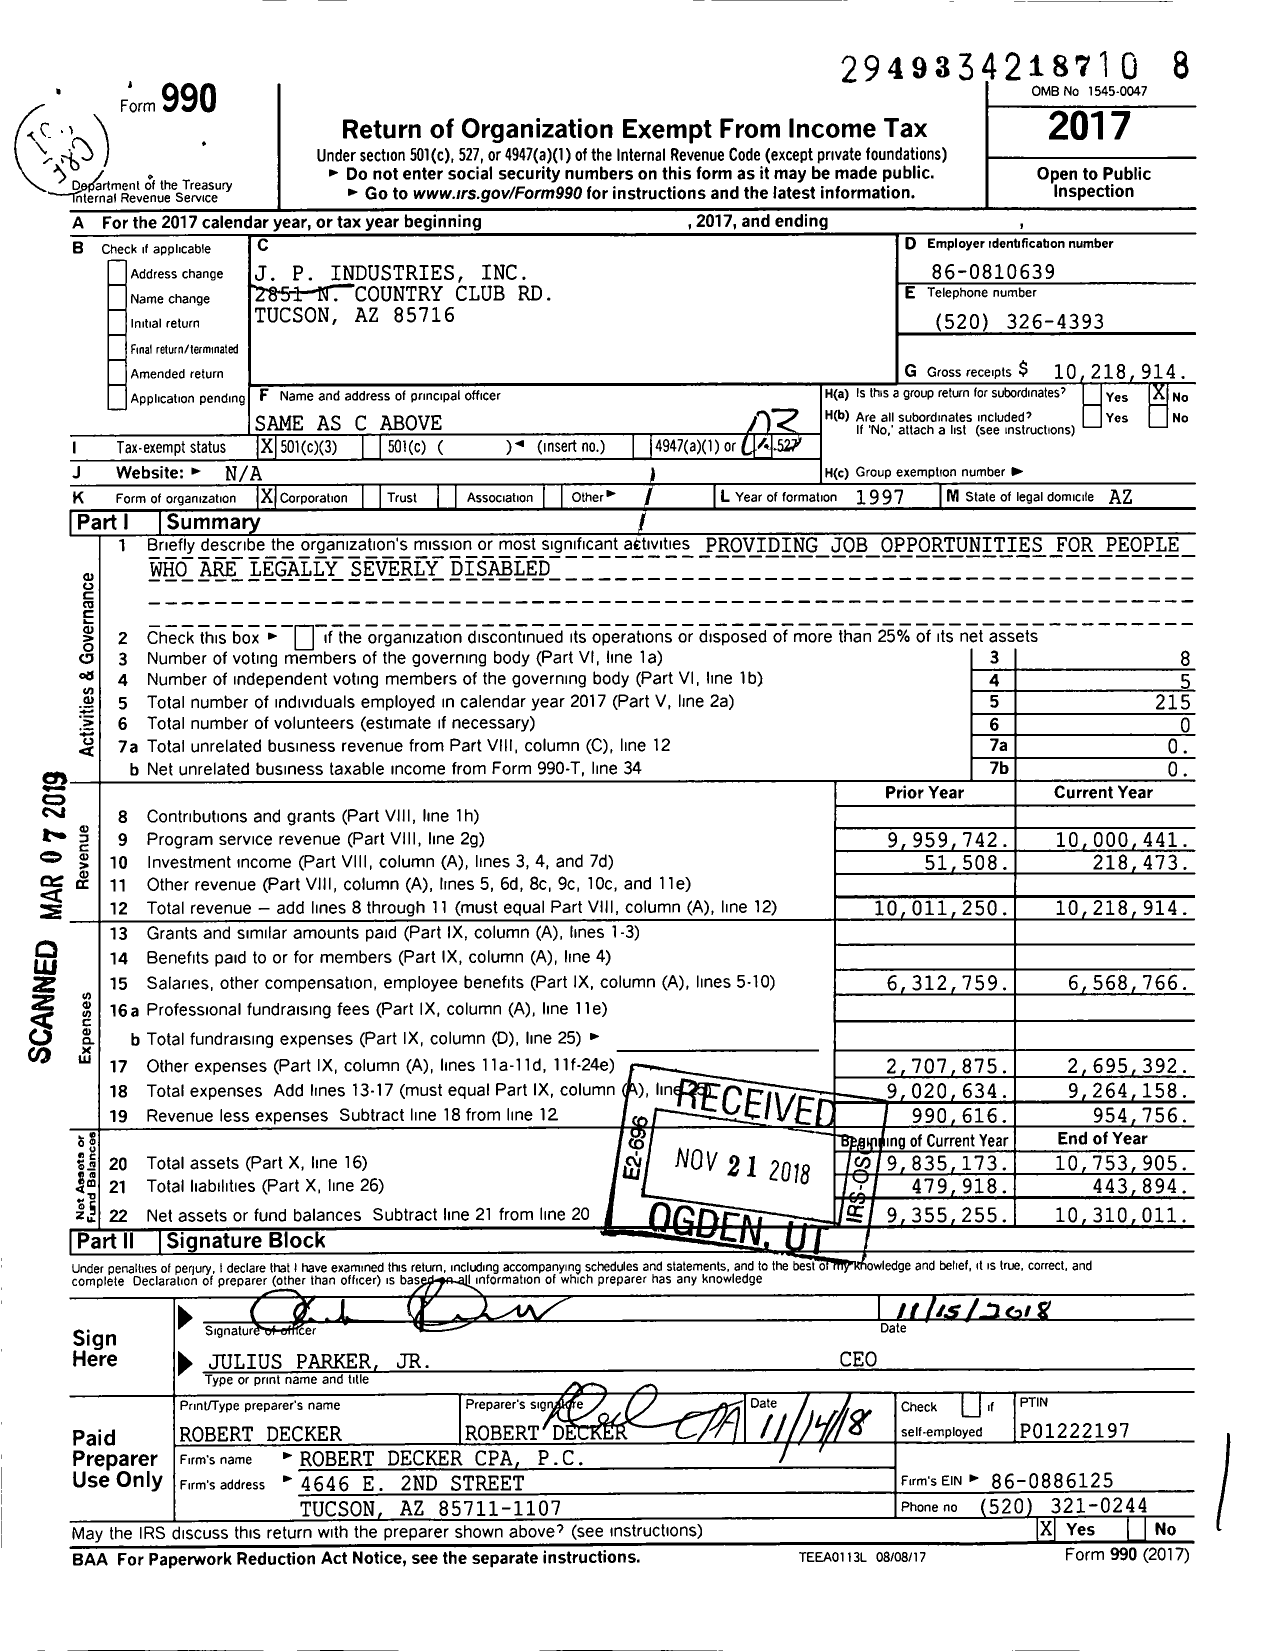 Image of first page of 2017 Form 990 for J P Industries